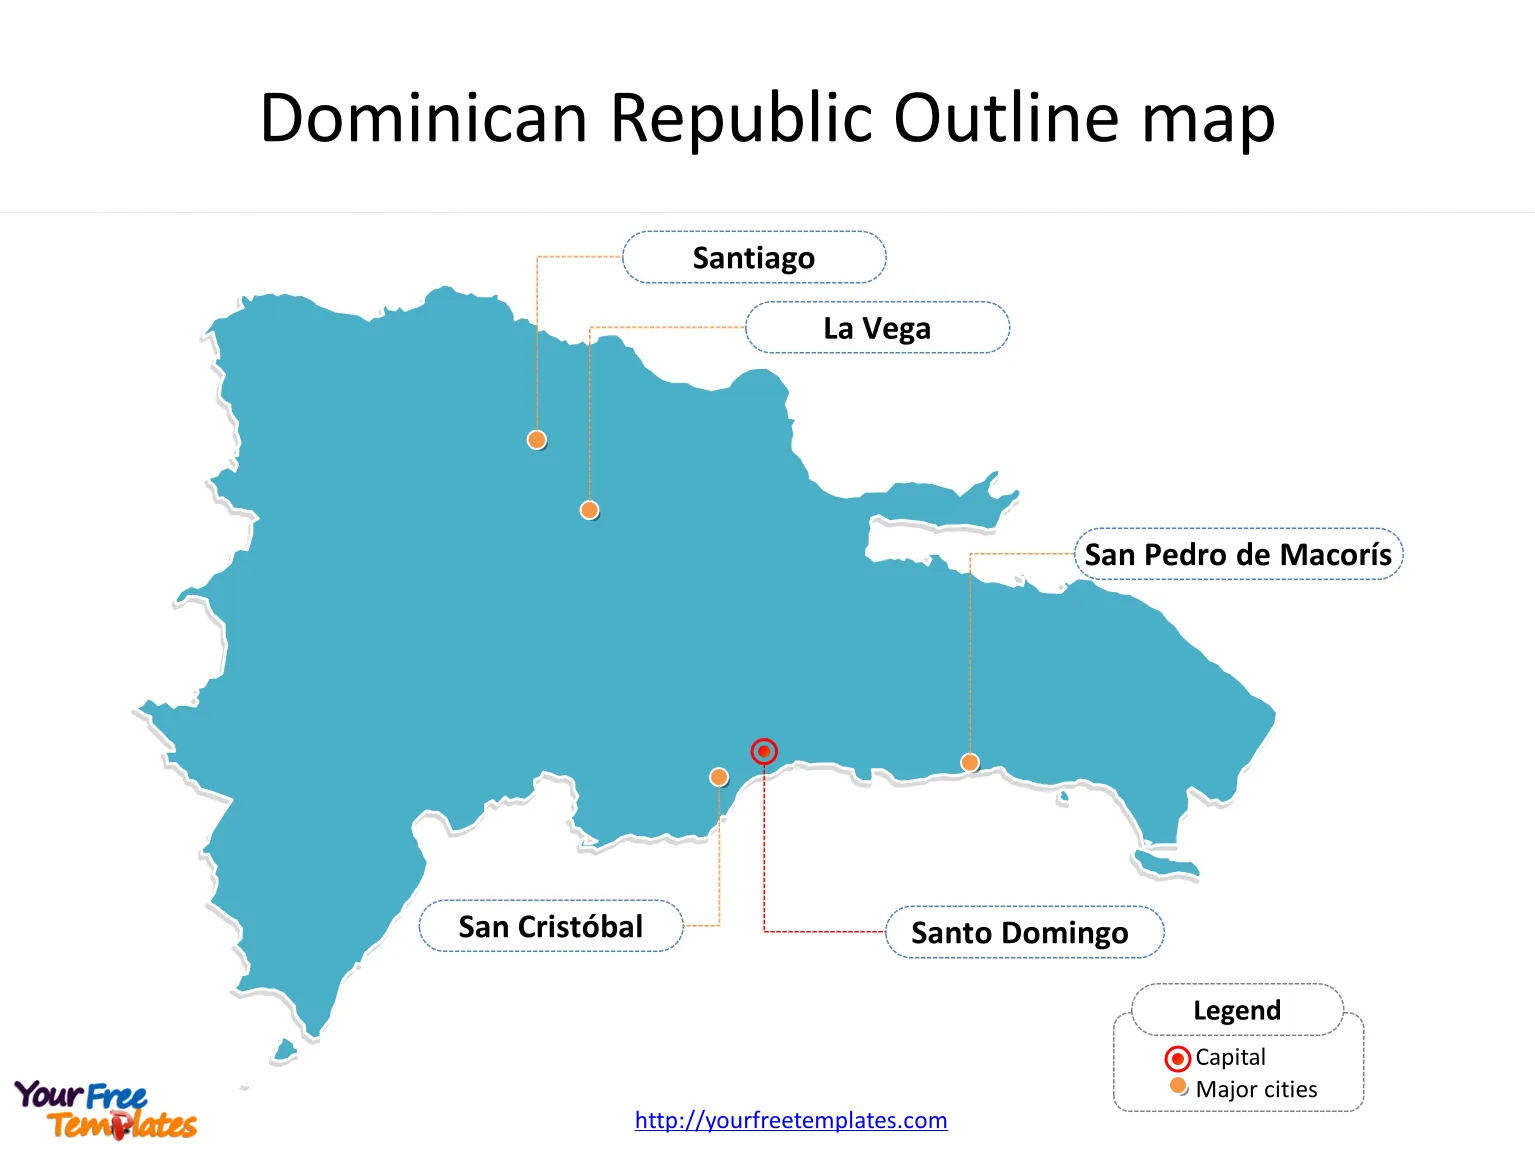 Map of Dominican Republic with political division and major Provinces labeled on the Dominican Republic map blank templates